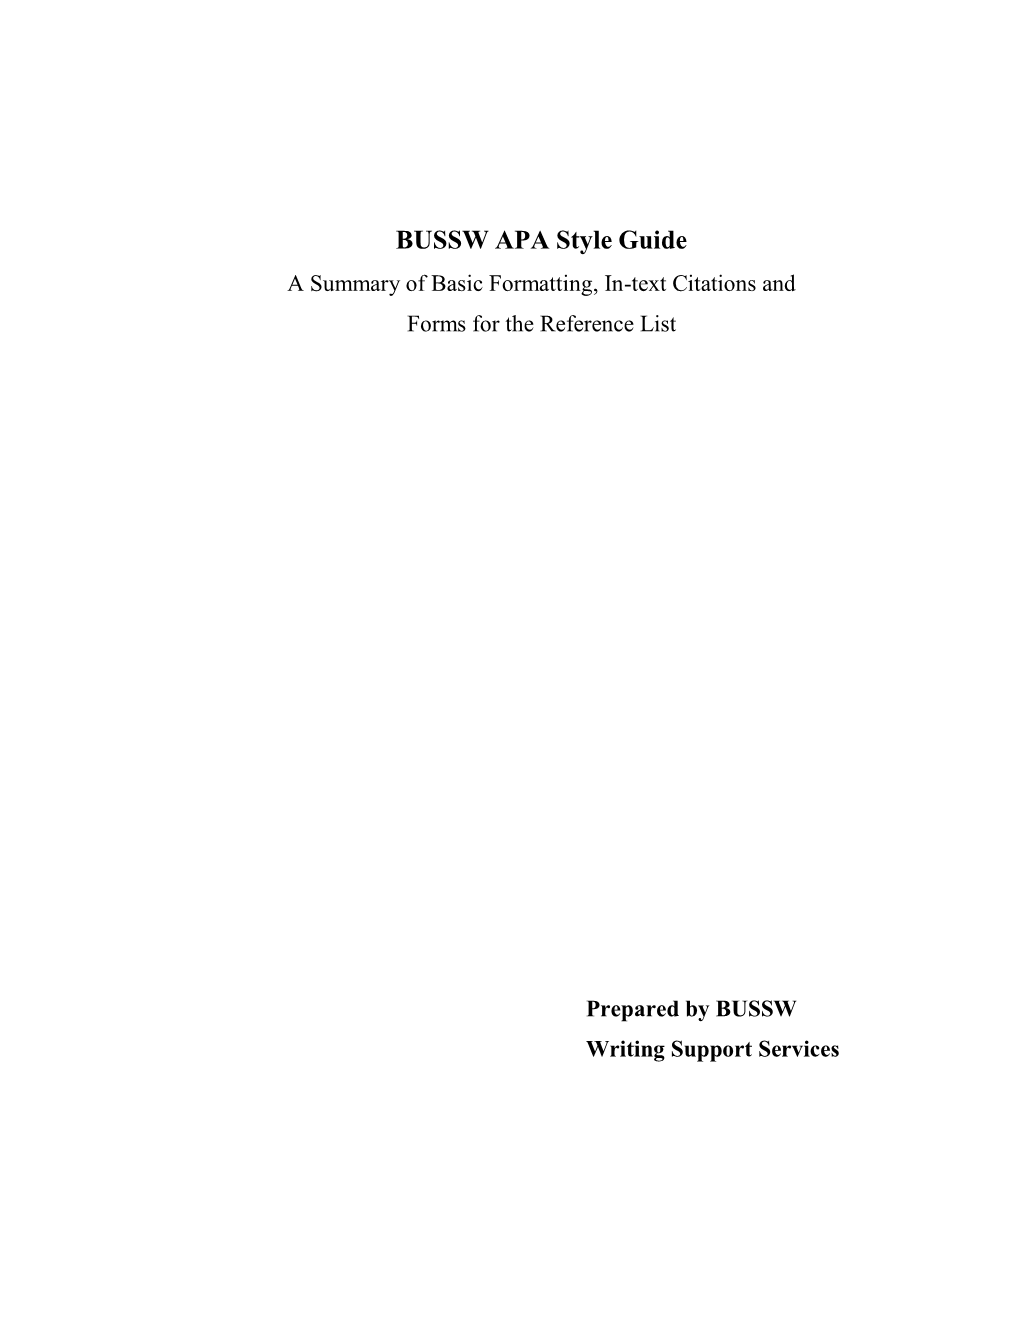 BUSSW APA Style Guide